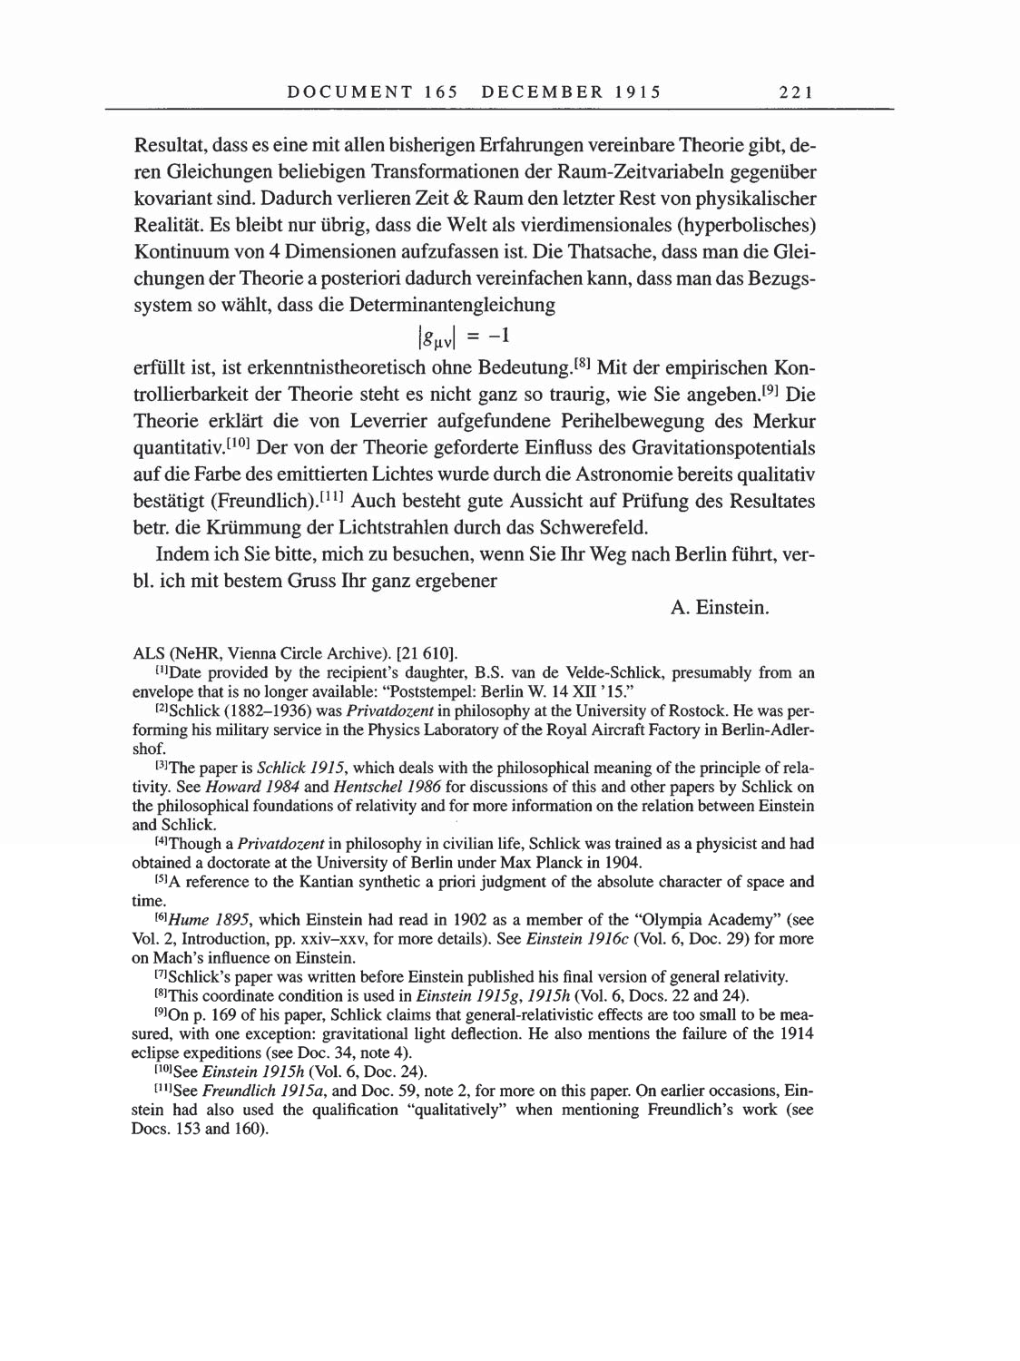 Volume 8, Part A: The Berlin Years: Correspondence 1914-1917 page 221